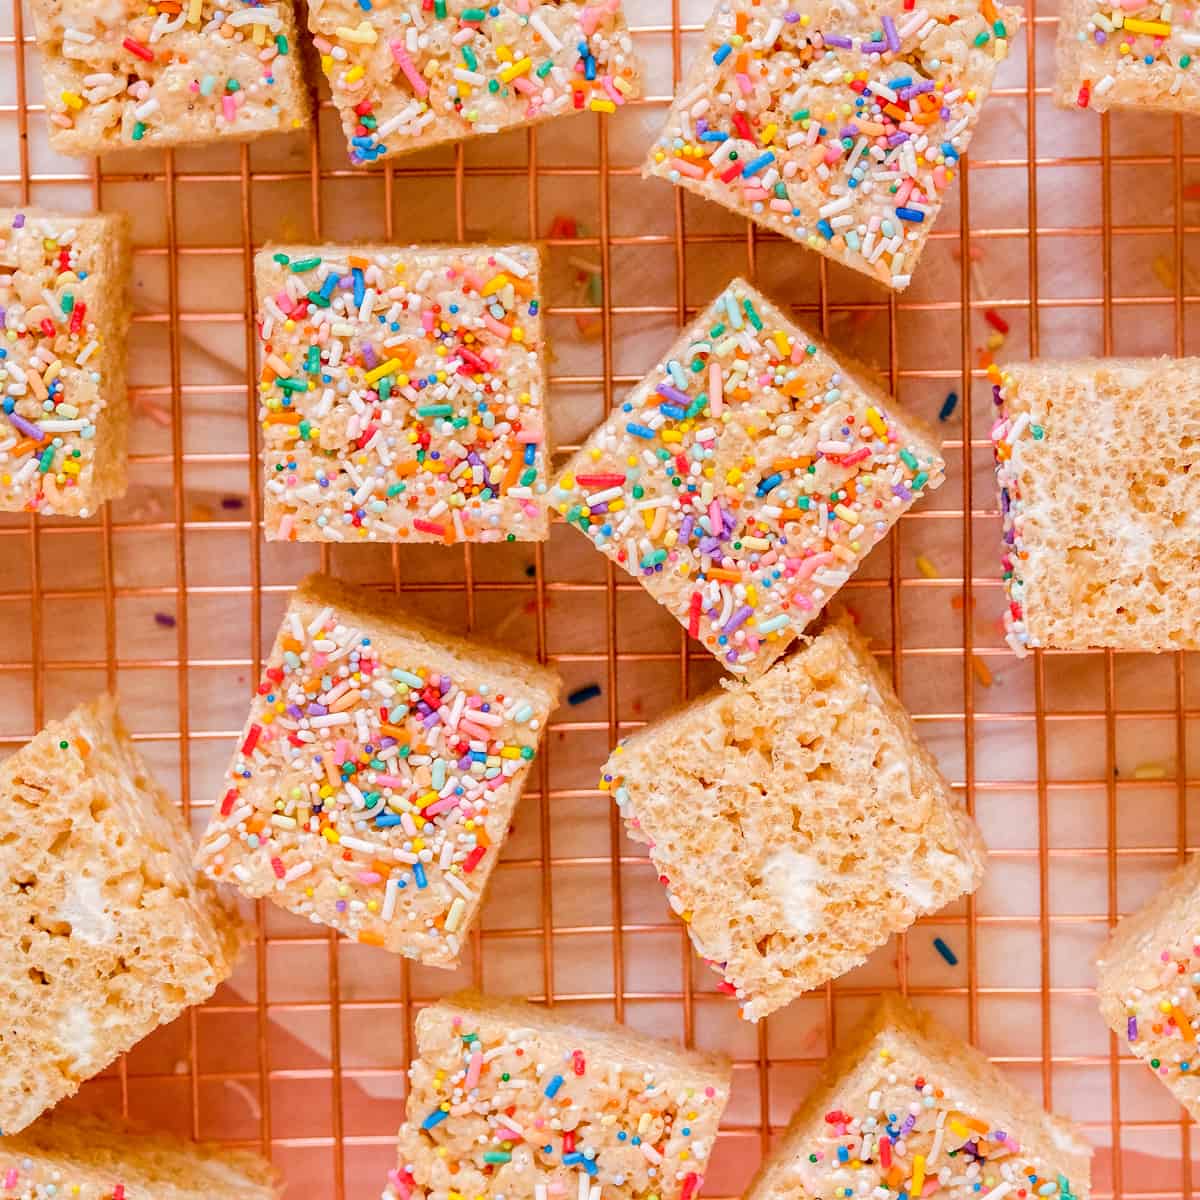 Next-Level Rice Krispie Treats! - Gimme Some Oven